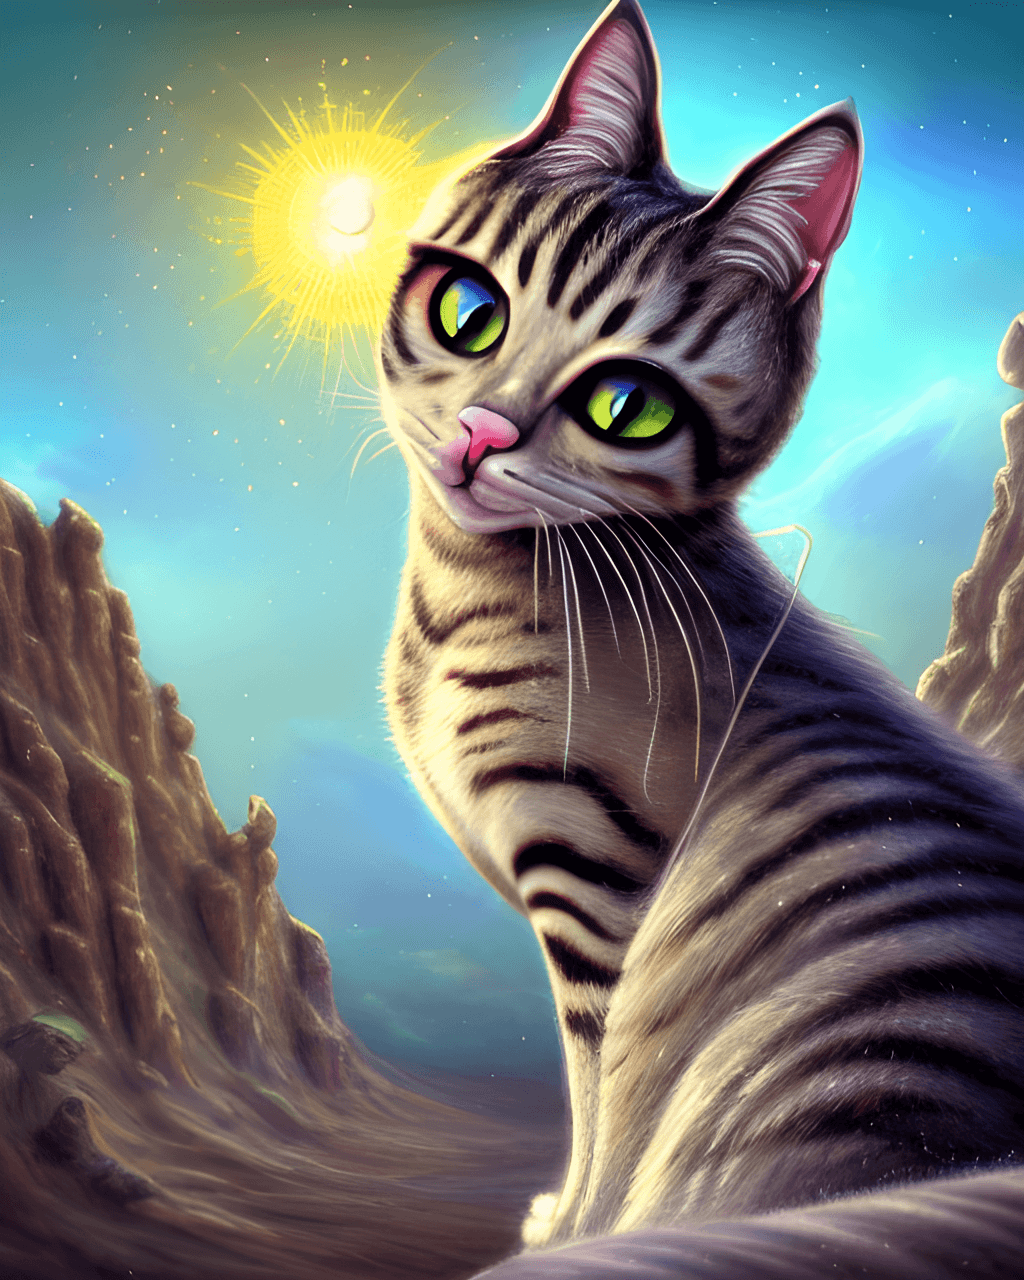 Incredible Stunning Beauty Fantasy Art Desertscape Pretty Clothed Cat ...